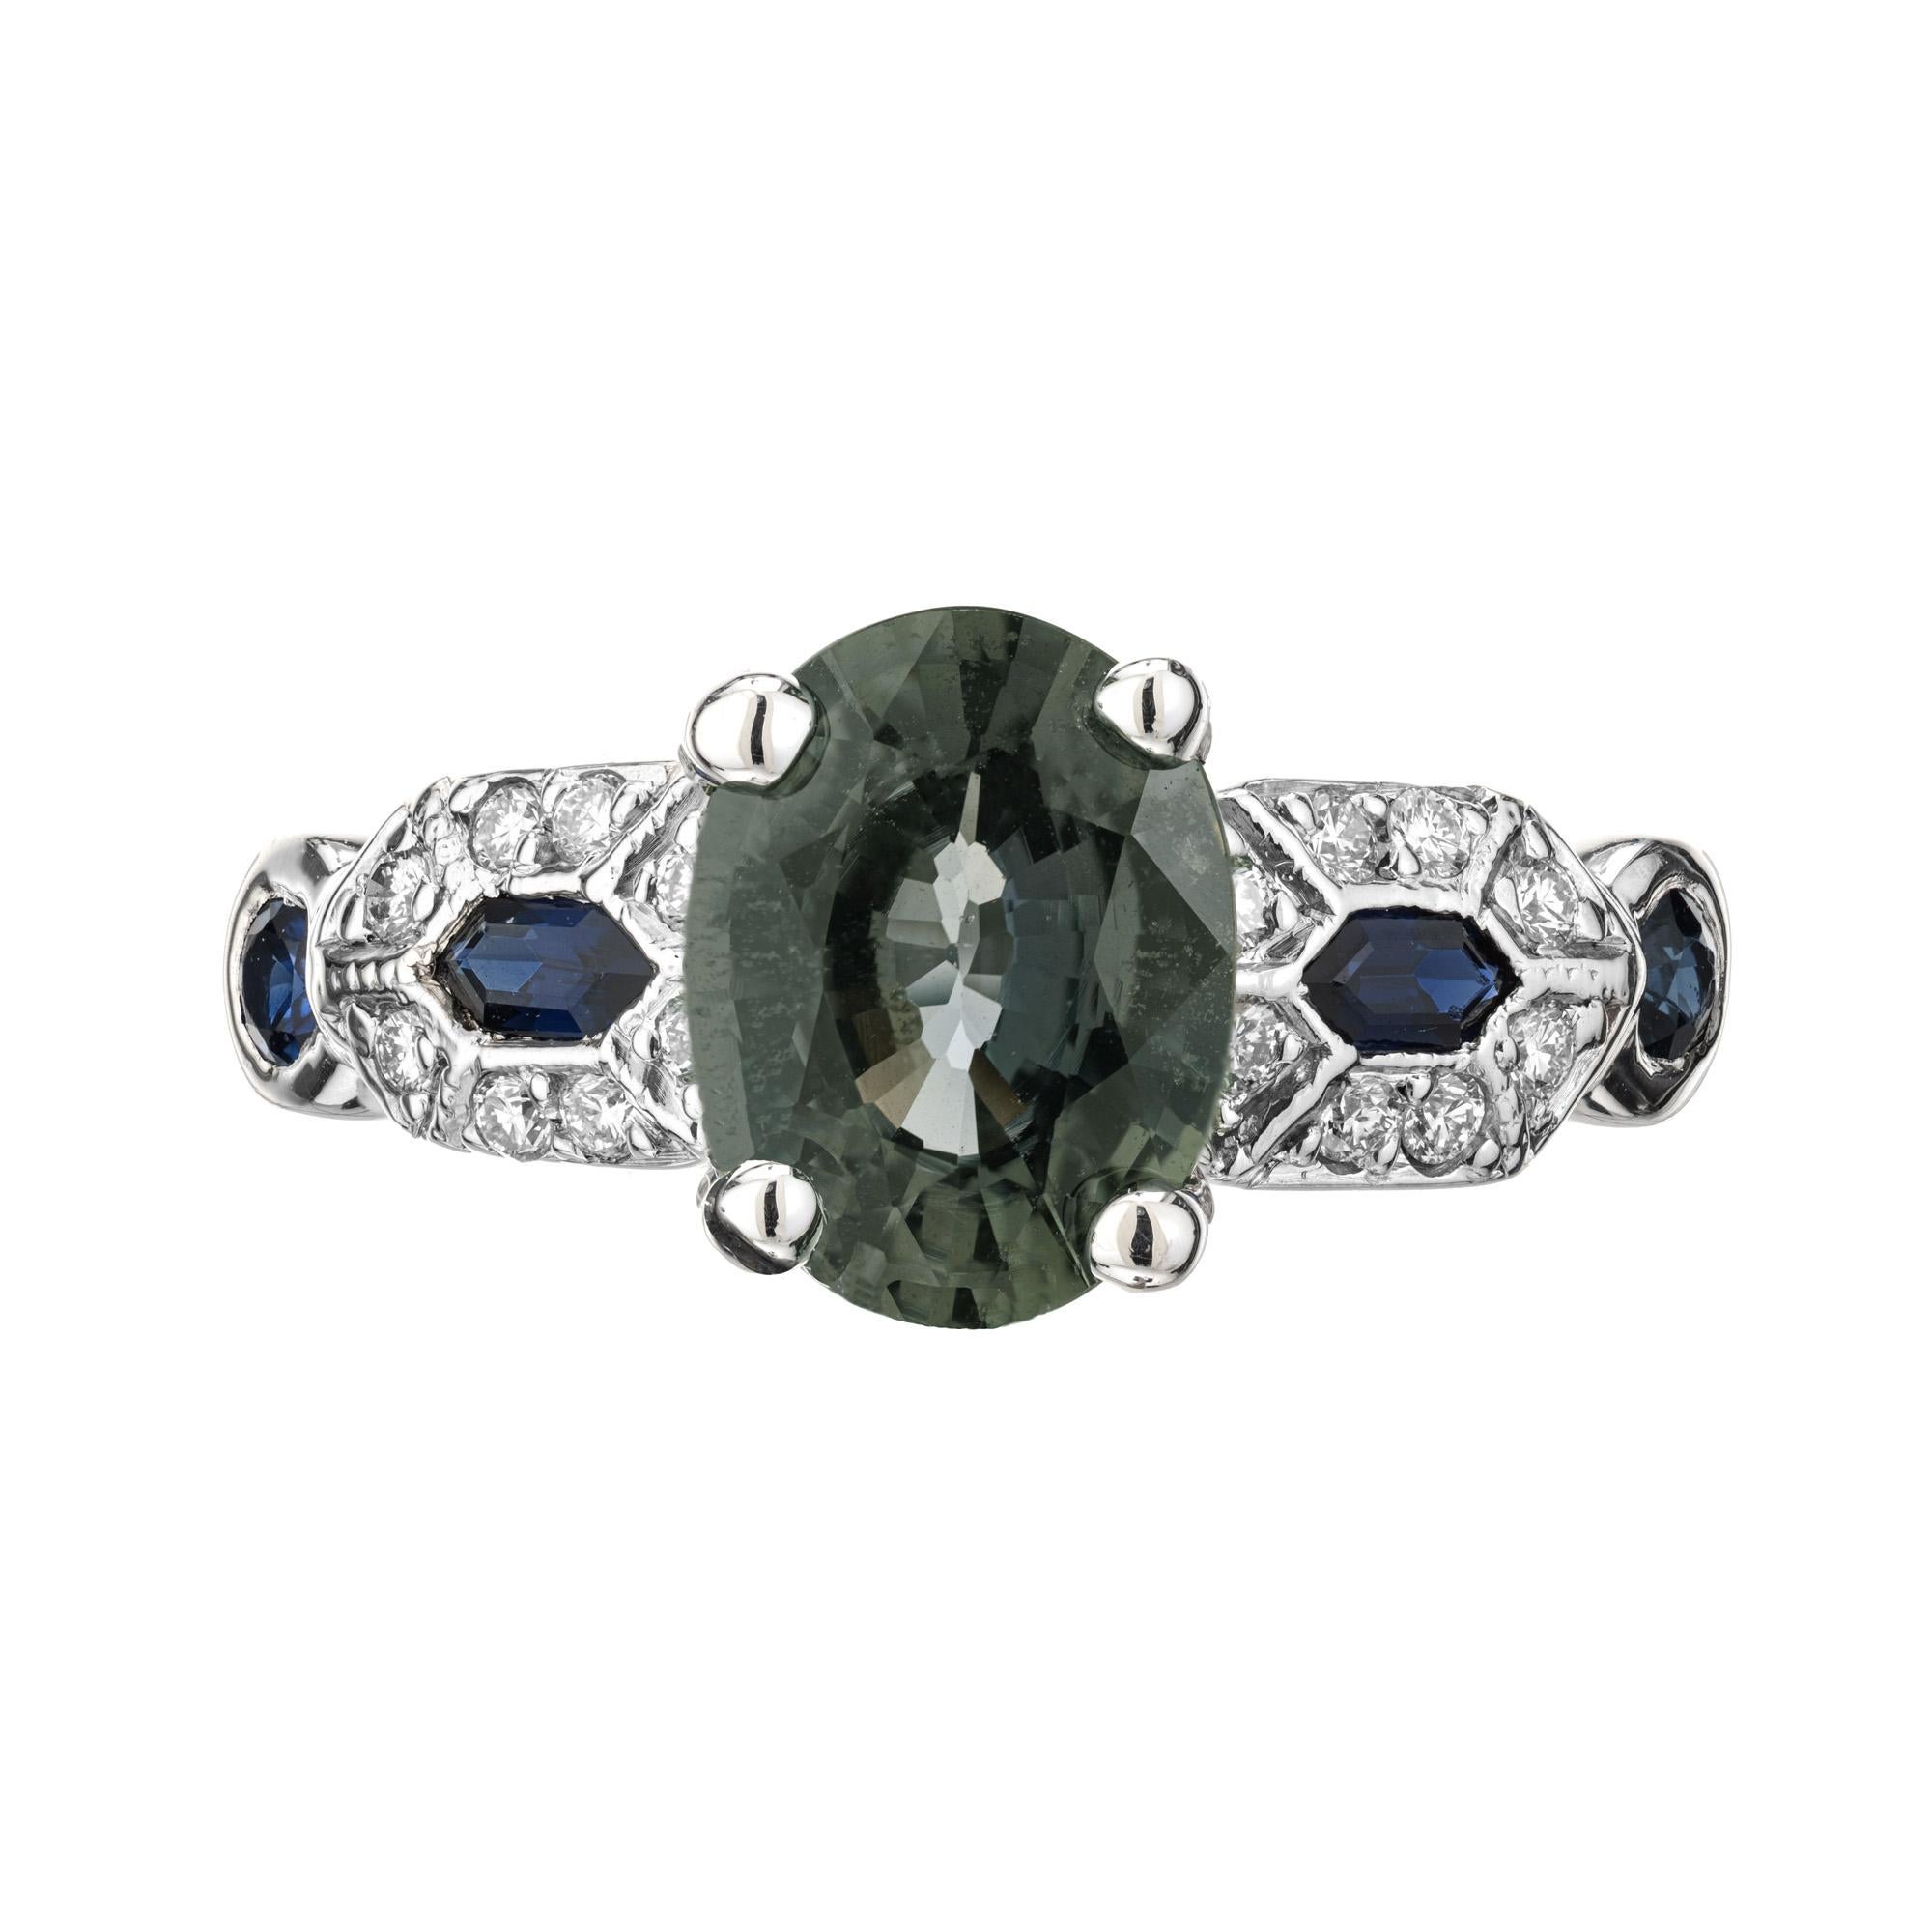 Peter Suchy natural color change Sapphire engagement ring, with diamond and sapphire accents.  GIA certified as changing colors in different light from bluish green to greenish grey. Vintage inspired Platinum ring designed to show off the beauty of